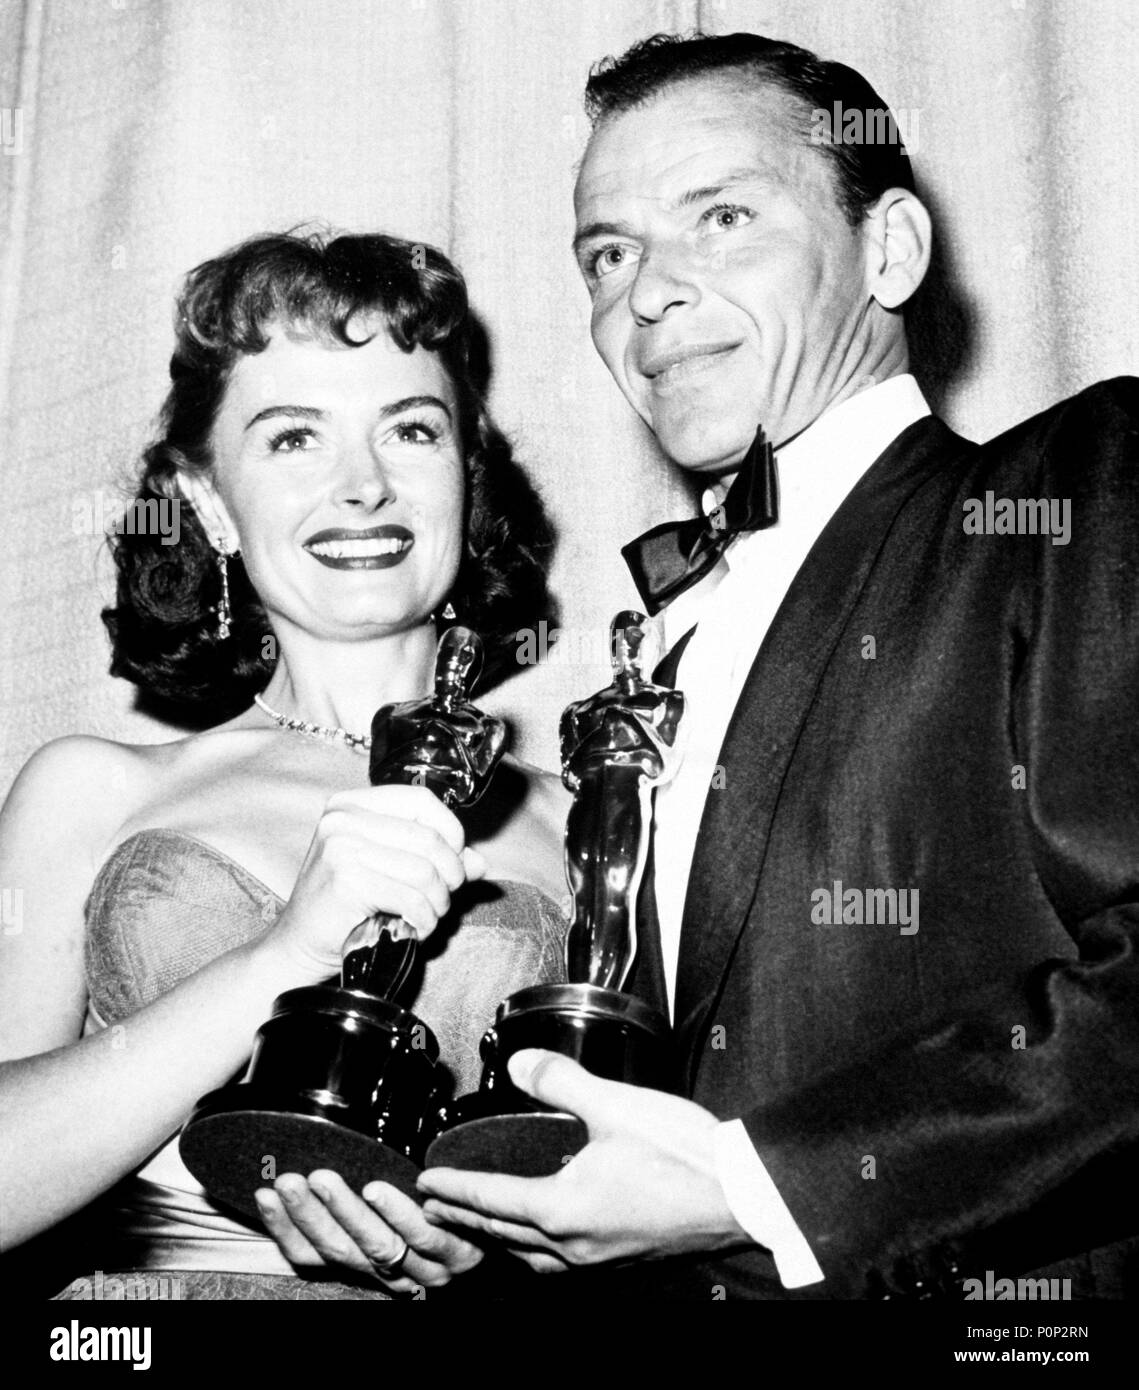 Description: 26th Academy Awards (1954). Fran Sinatra, best actor in a supporting role for 'From Here to Eternety'. donna Reed, best actress in a supporting role for 'From Here to Eternety'..  Year: 1954.  Stars: DONNA REED; FRANK SINATRA. Stock Photo